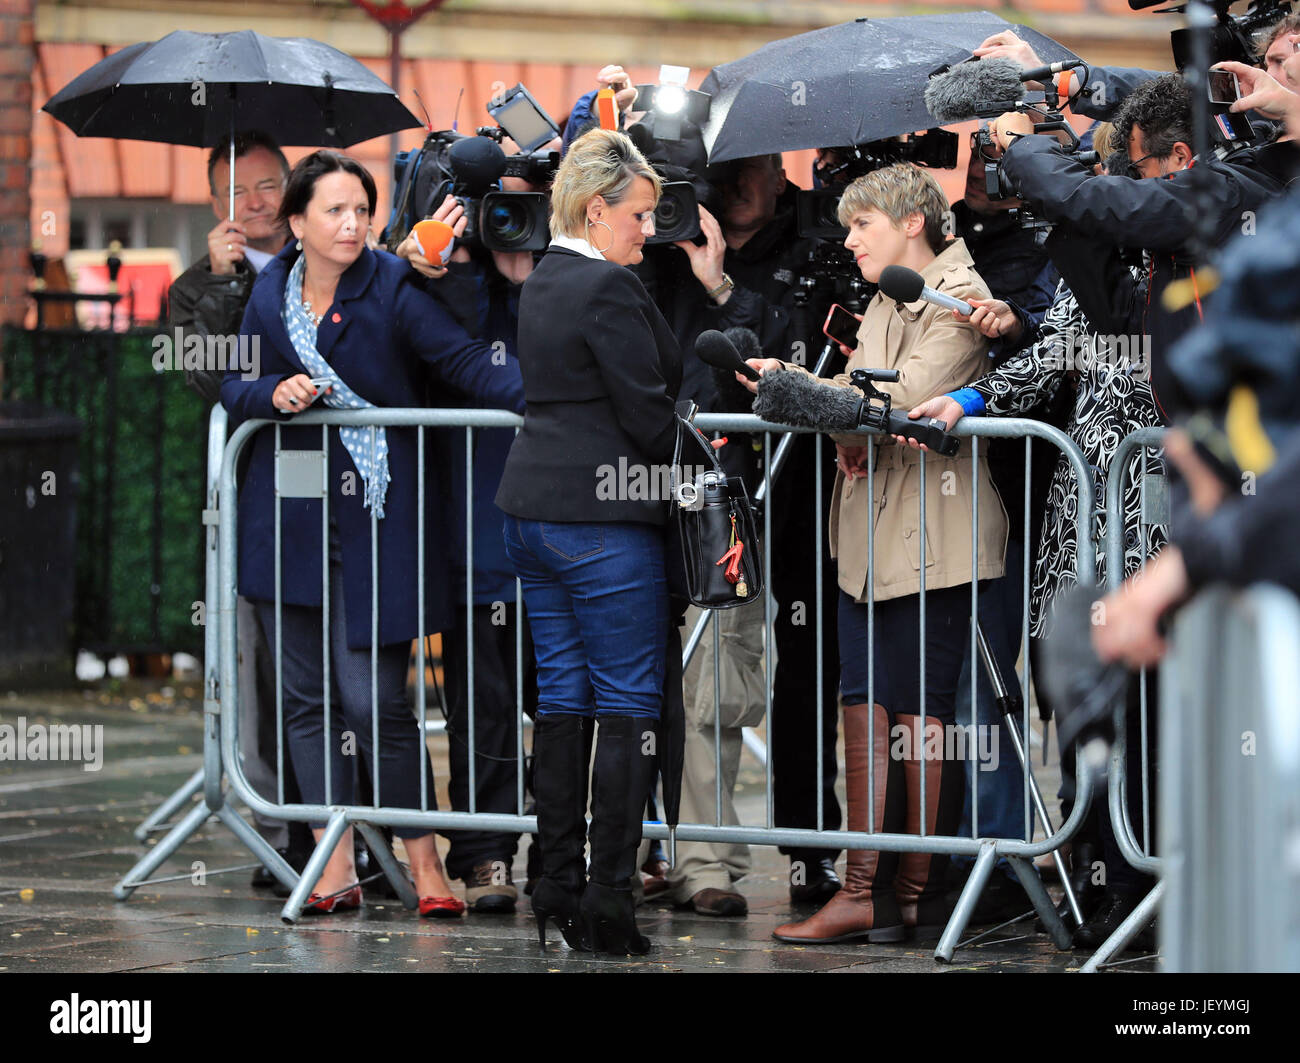 Louise Brookes speaks to the media outside Parr Hall, Warrington, where the Crown Prosecution Service said Hillsborough match commander David Duckenfield, former chief constable Sir Norman Bettison and four other individuals have been charged with offences relating to the Hillsborough disaster. Stock Photo